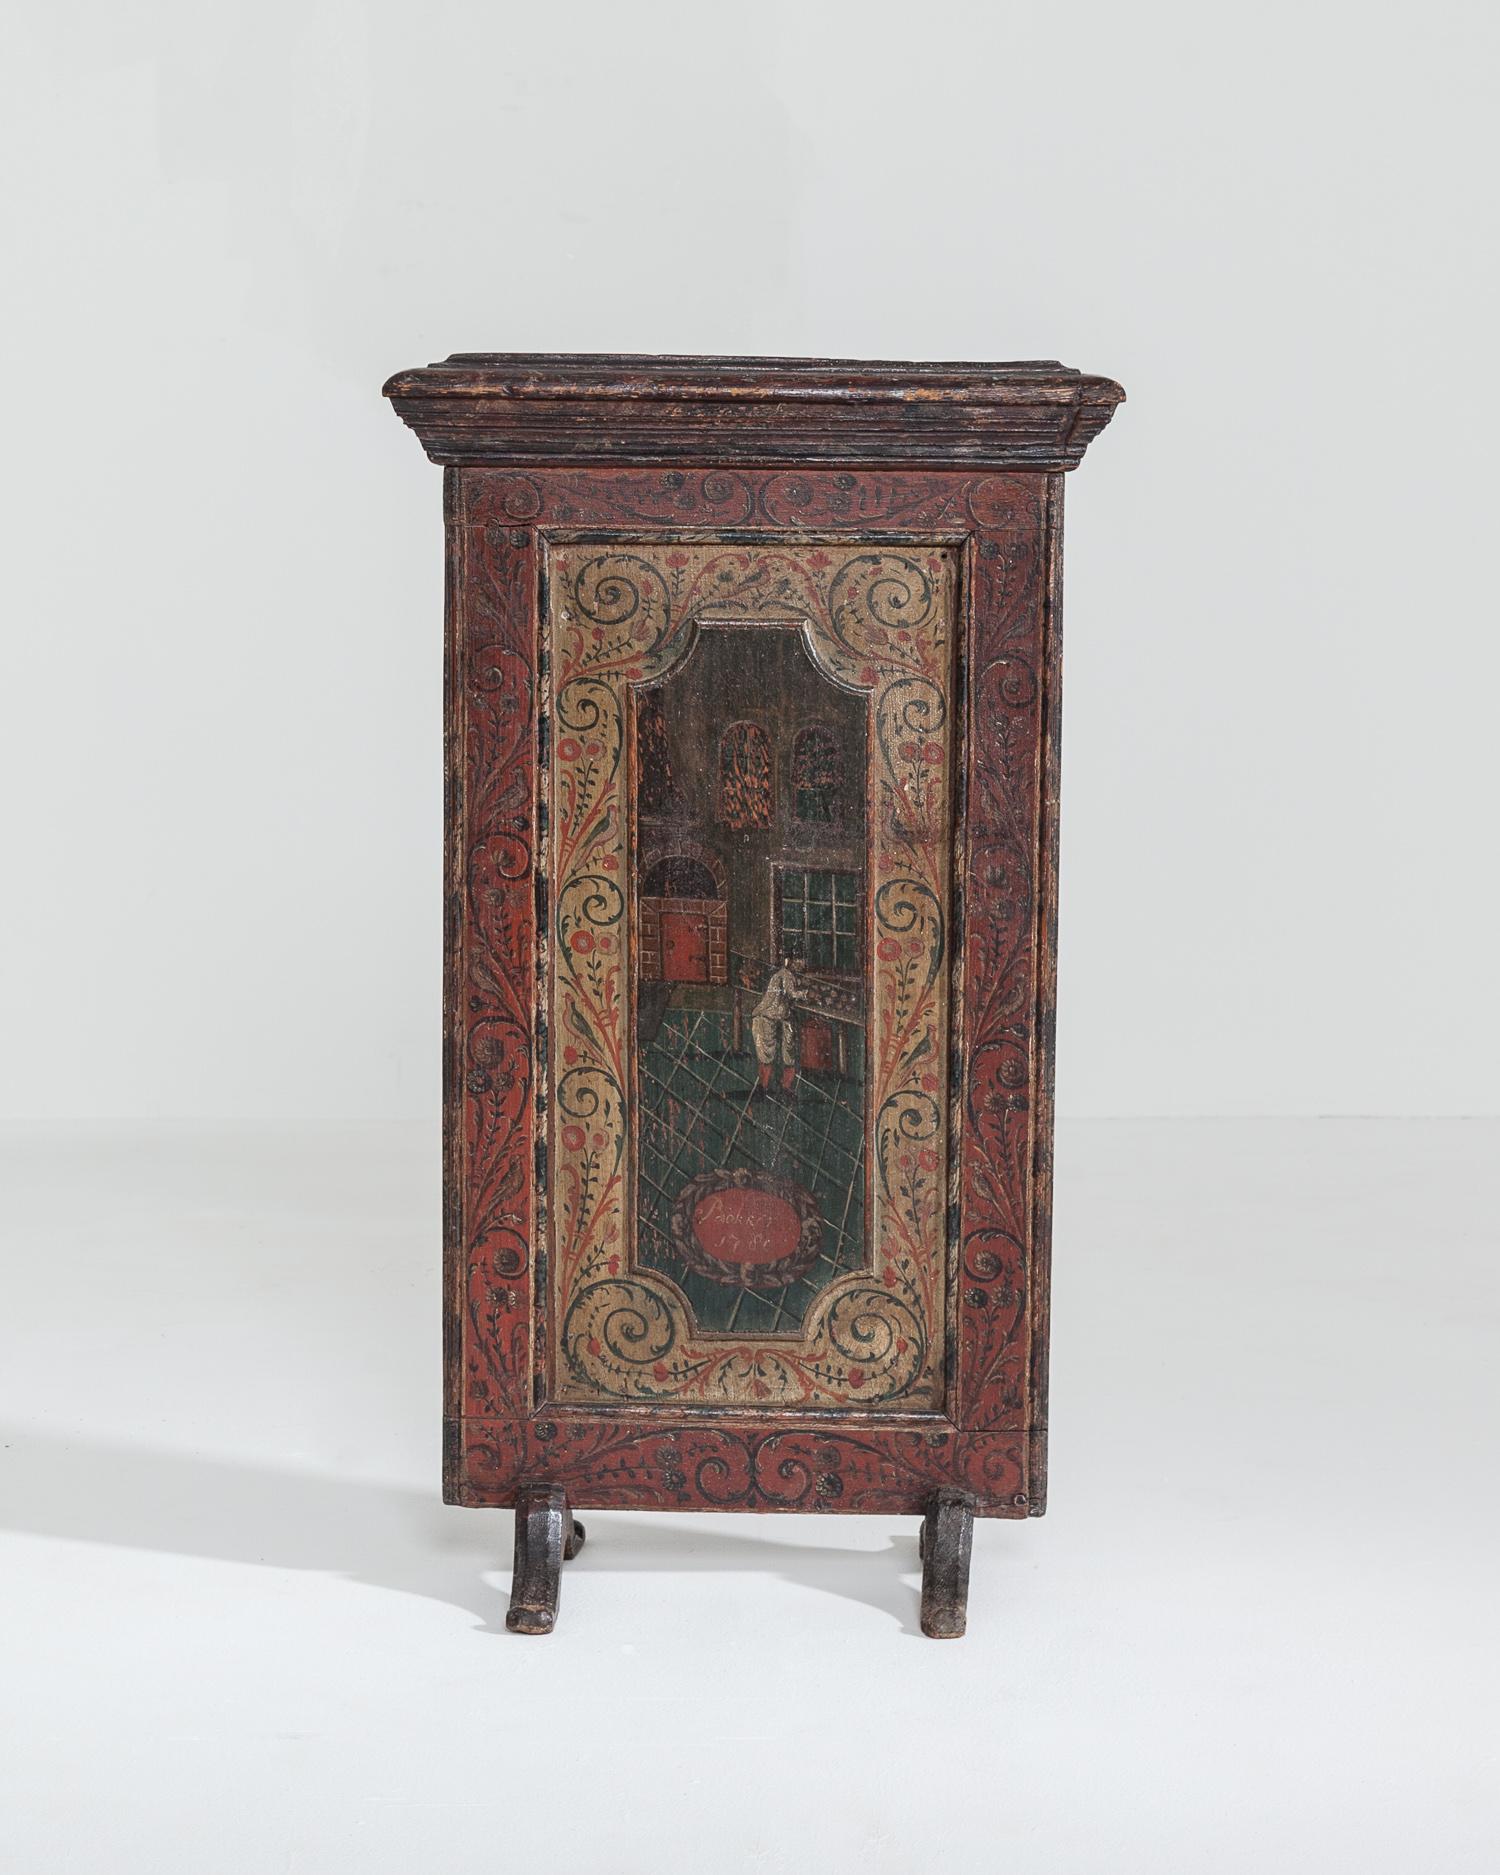 A rare 18th century Dutch painted fire screen.

The scene shows a baker at work and is dated 1780.

Measures: Height 81cm x width 48cm x depth 27cm.
 